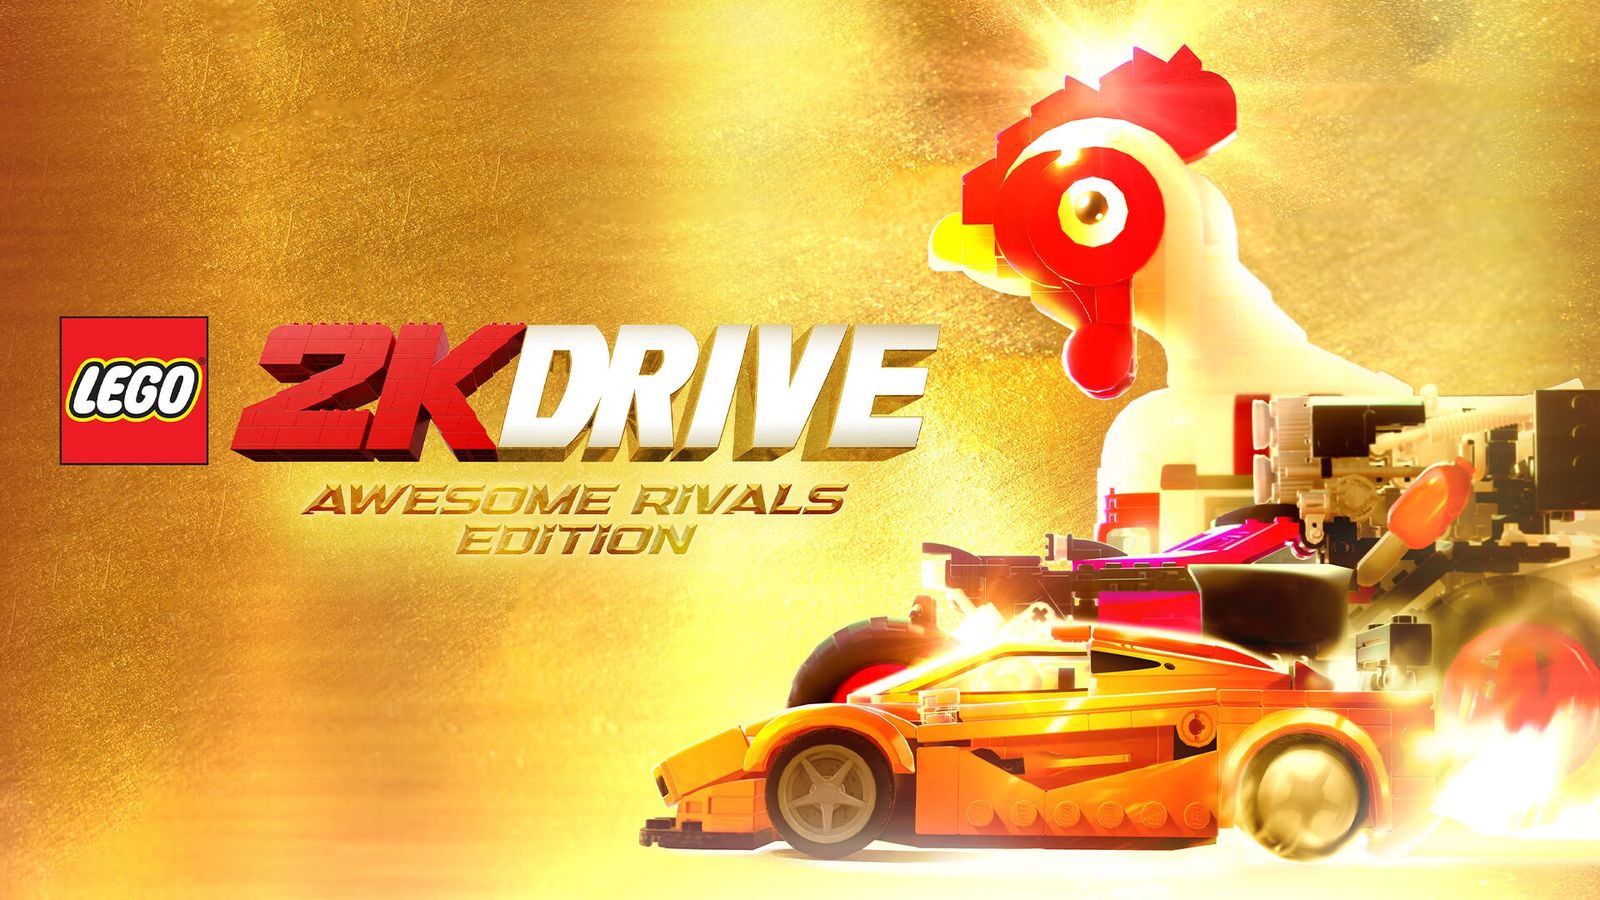 LEGO 2K Drive Awesome Rivals Edition 